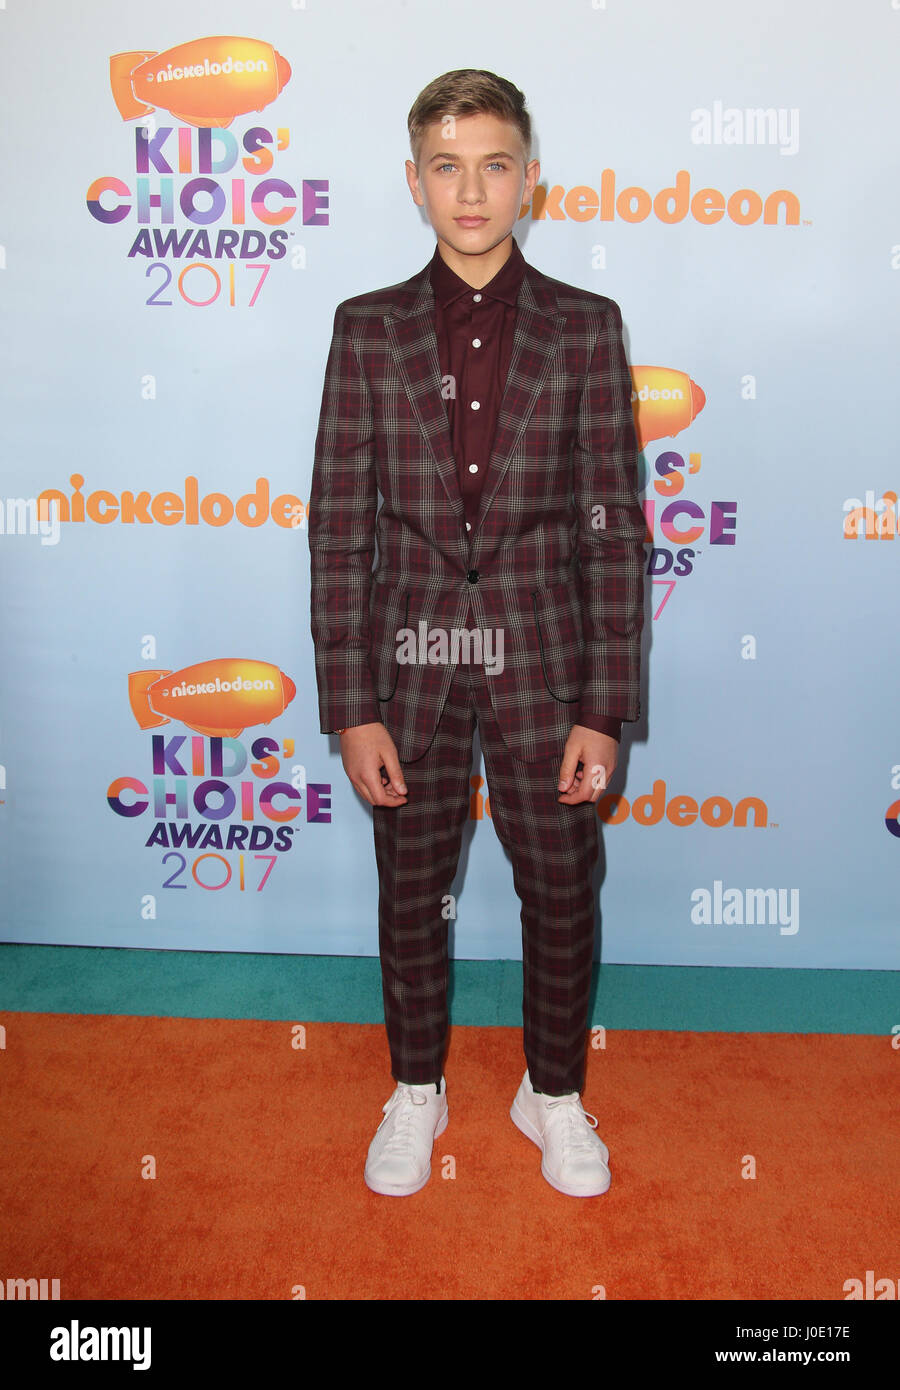 Nickelodeon's 2017 Kids' Choice Awards - Arrivals  Featuring: Thomas Kuc Where: Los Angeles, California, United States When: 12 Mar 2017 Stock Photo